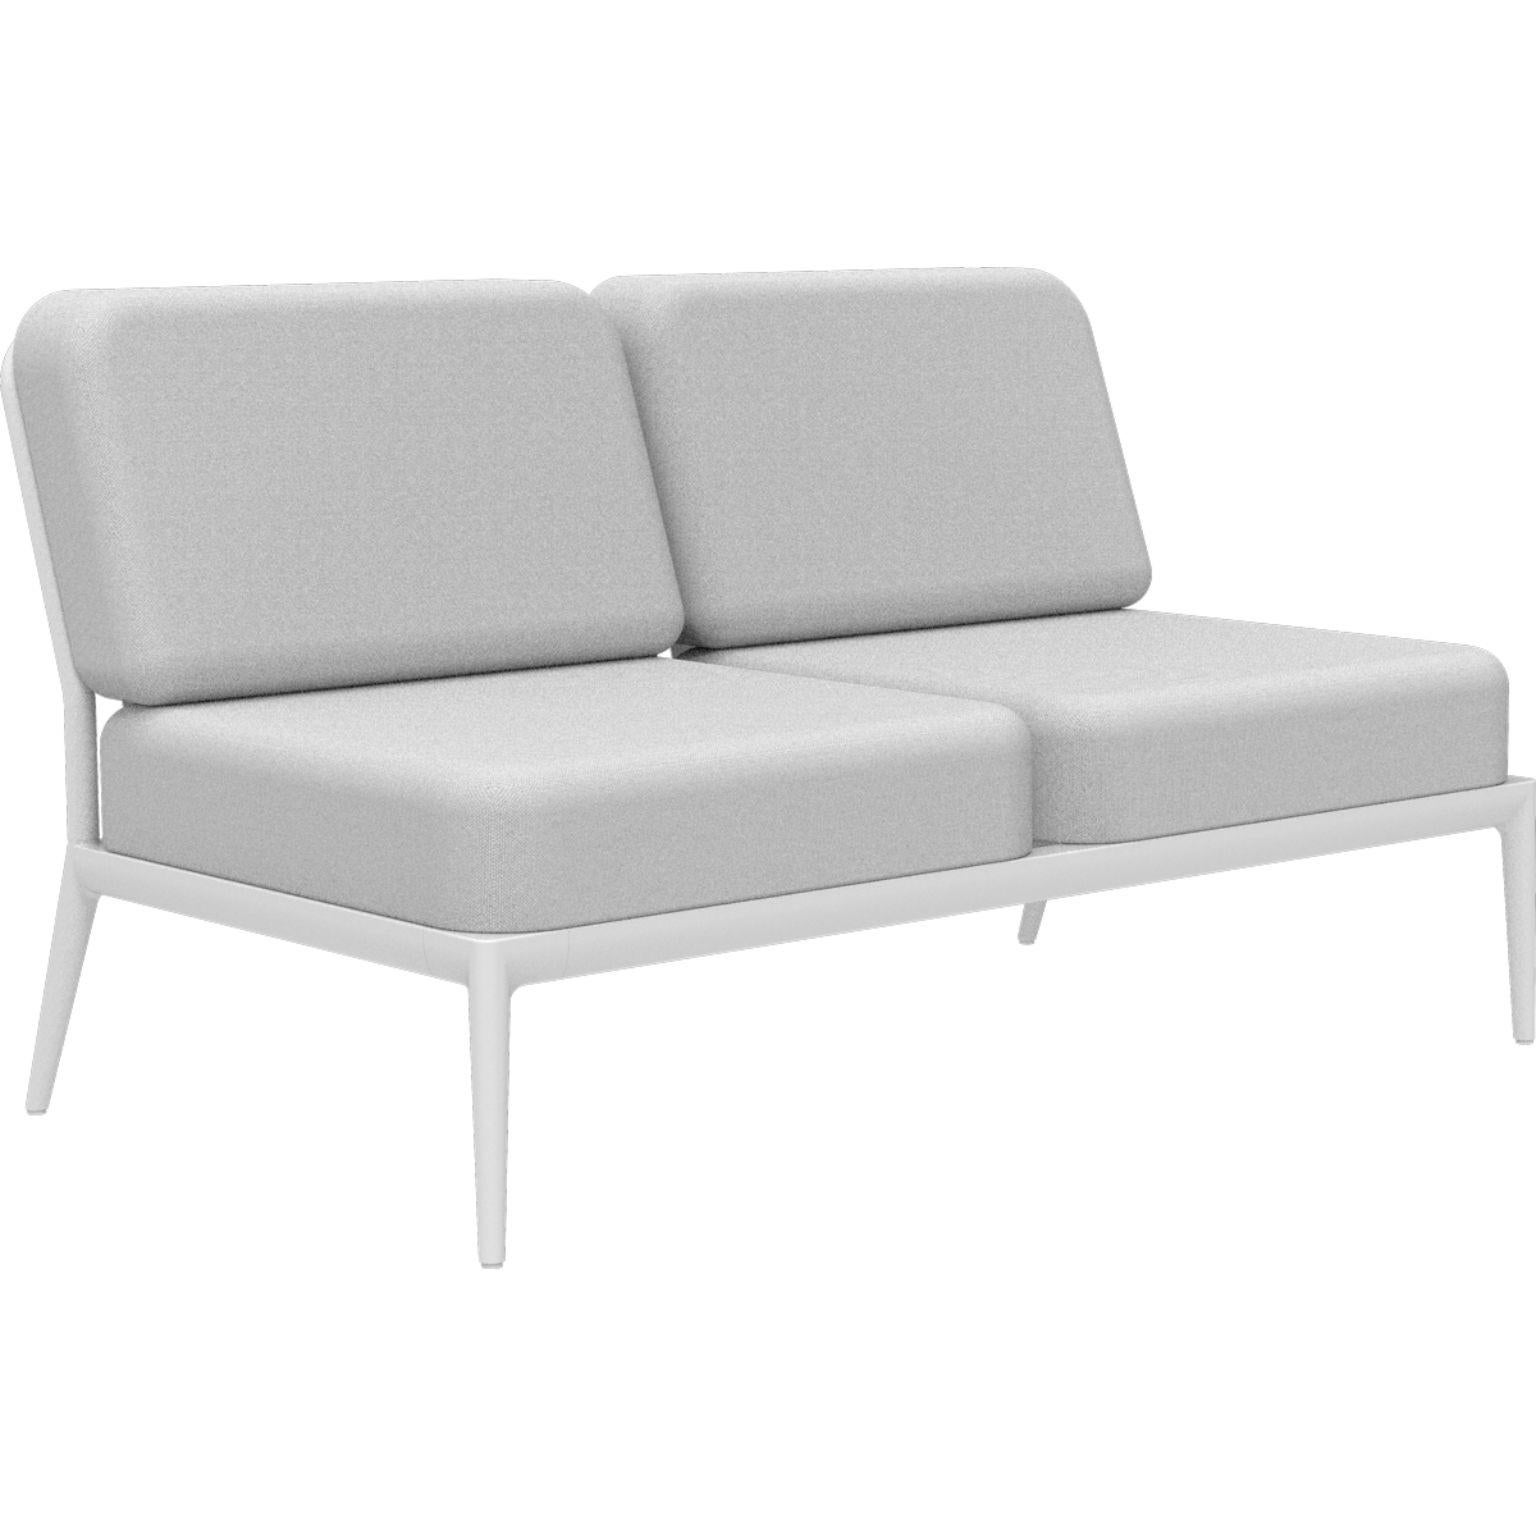 Ribbons White Double Central Modular sofa by MOWEE
Dimensions: D83 x W136 x H81 cm
Material: Aluminum, and upholstery.
Weight: 27 kg.
Also available in different colors and finishes.

An unmistakable collection for its beauty and robustness. A